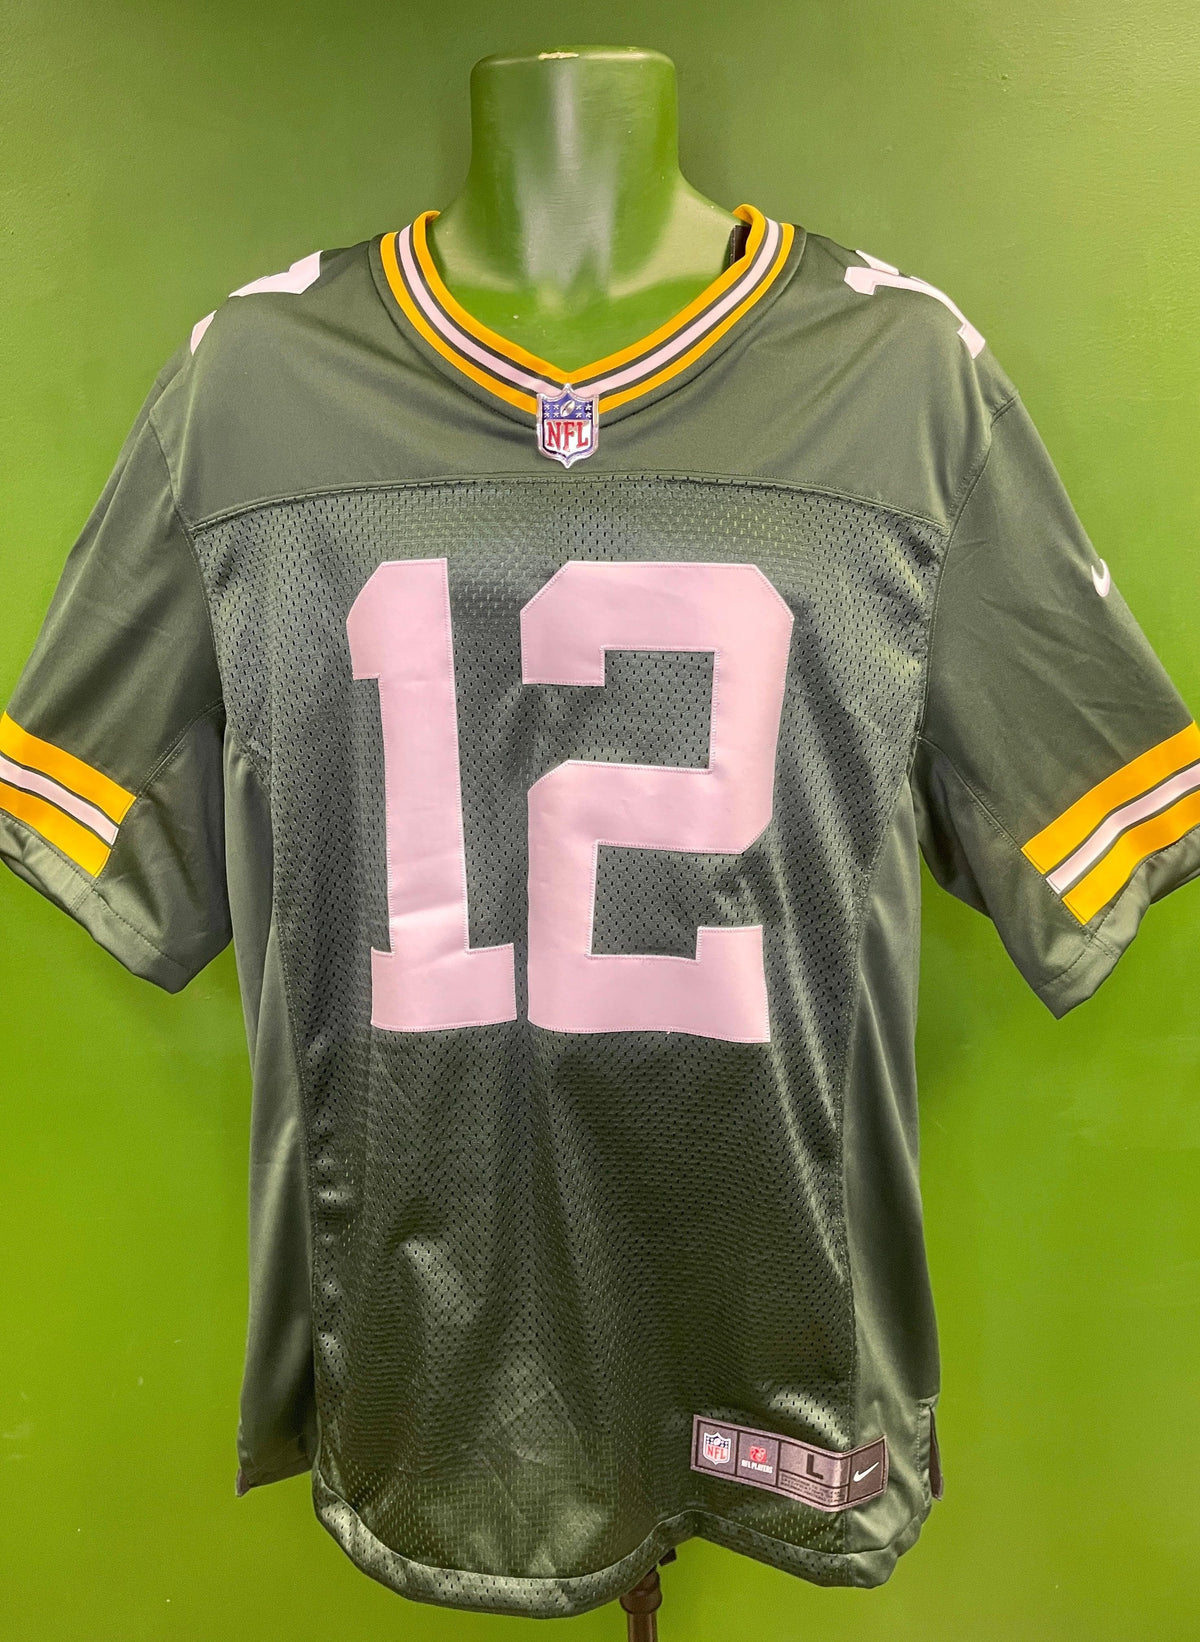 NFL Green Bay Packers Aaron Rodgers #12 Limited Stitched Jersey Men's Large NWT